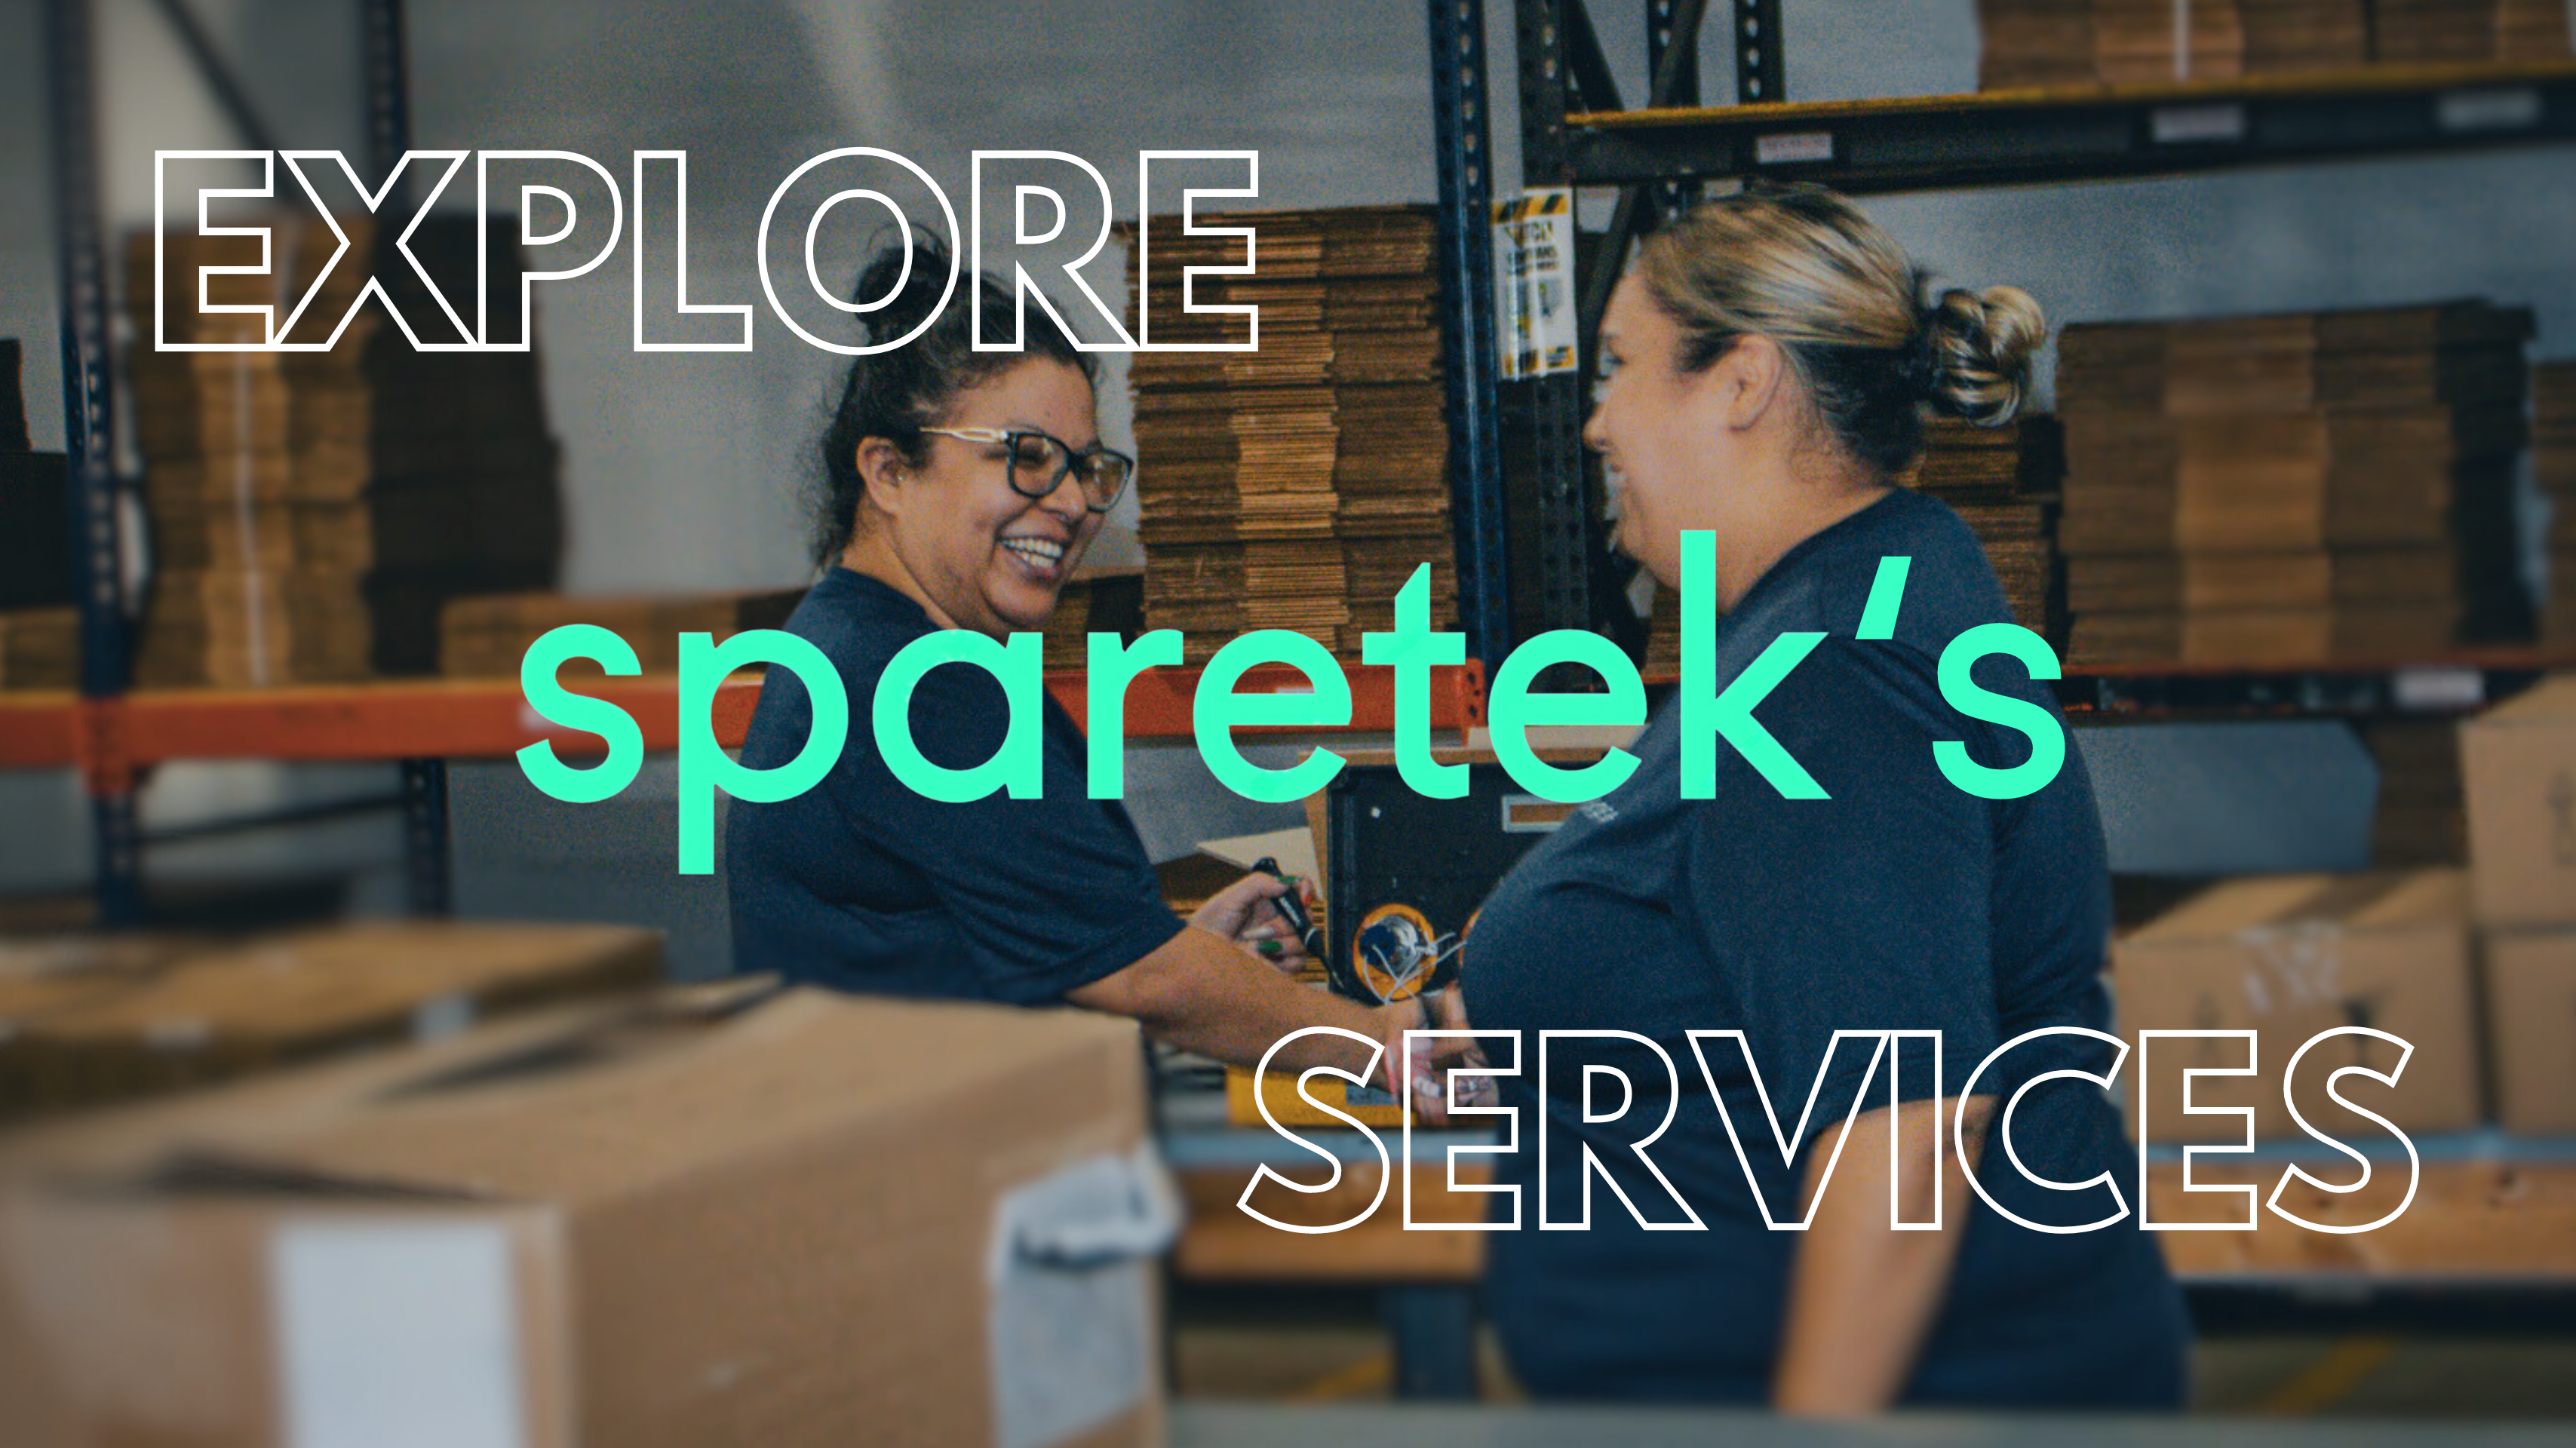 Learn more about Sparetek's Services